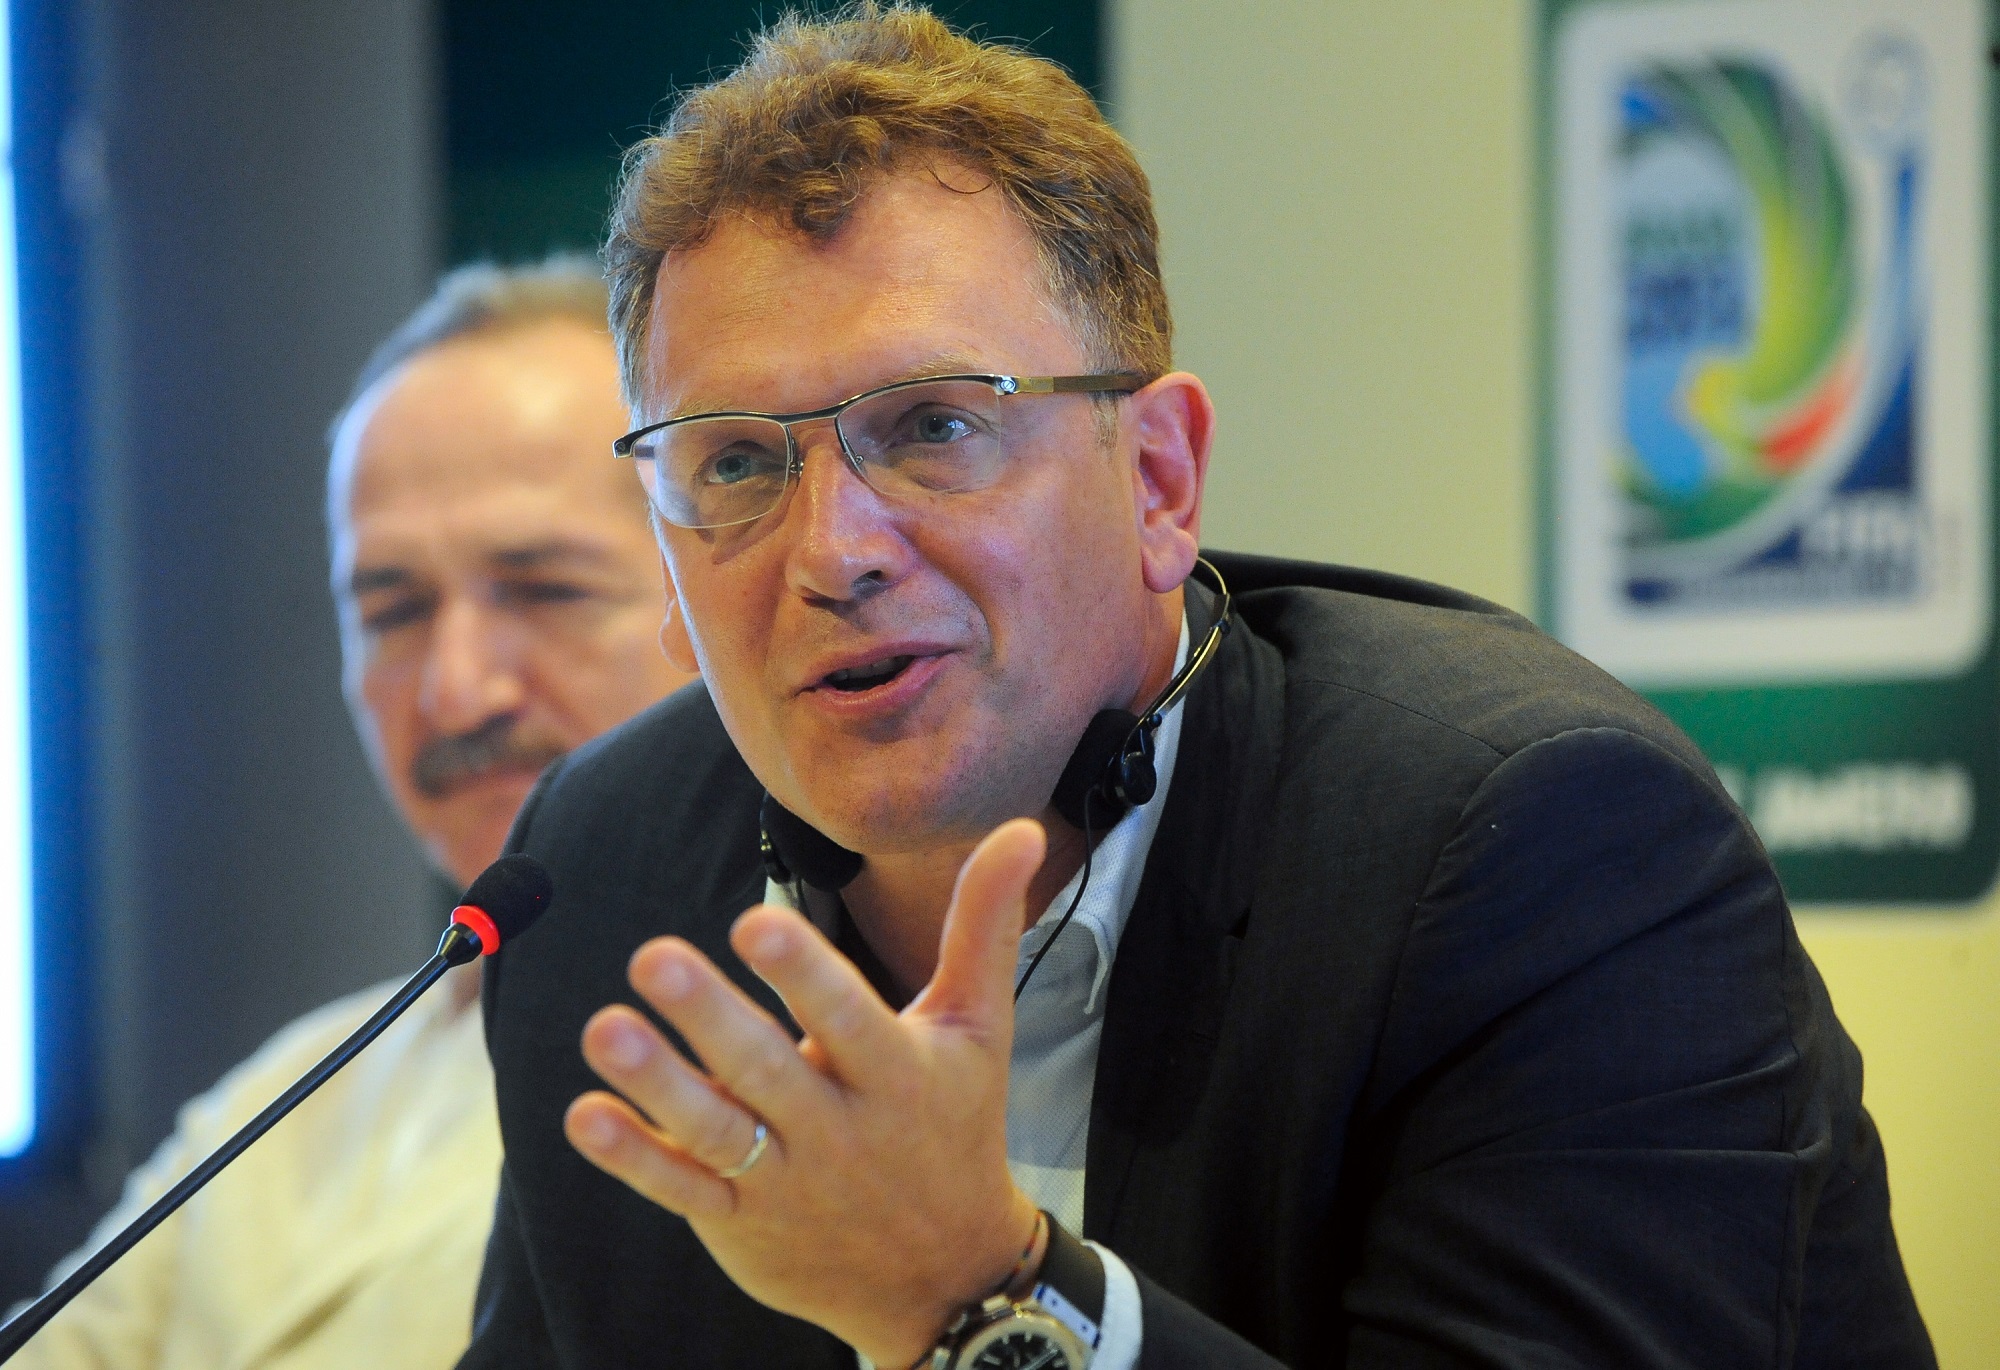 Swiss appeals court convicts ex-FIFA official Valcke of accepting bribes